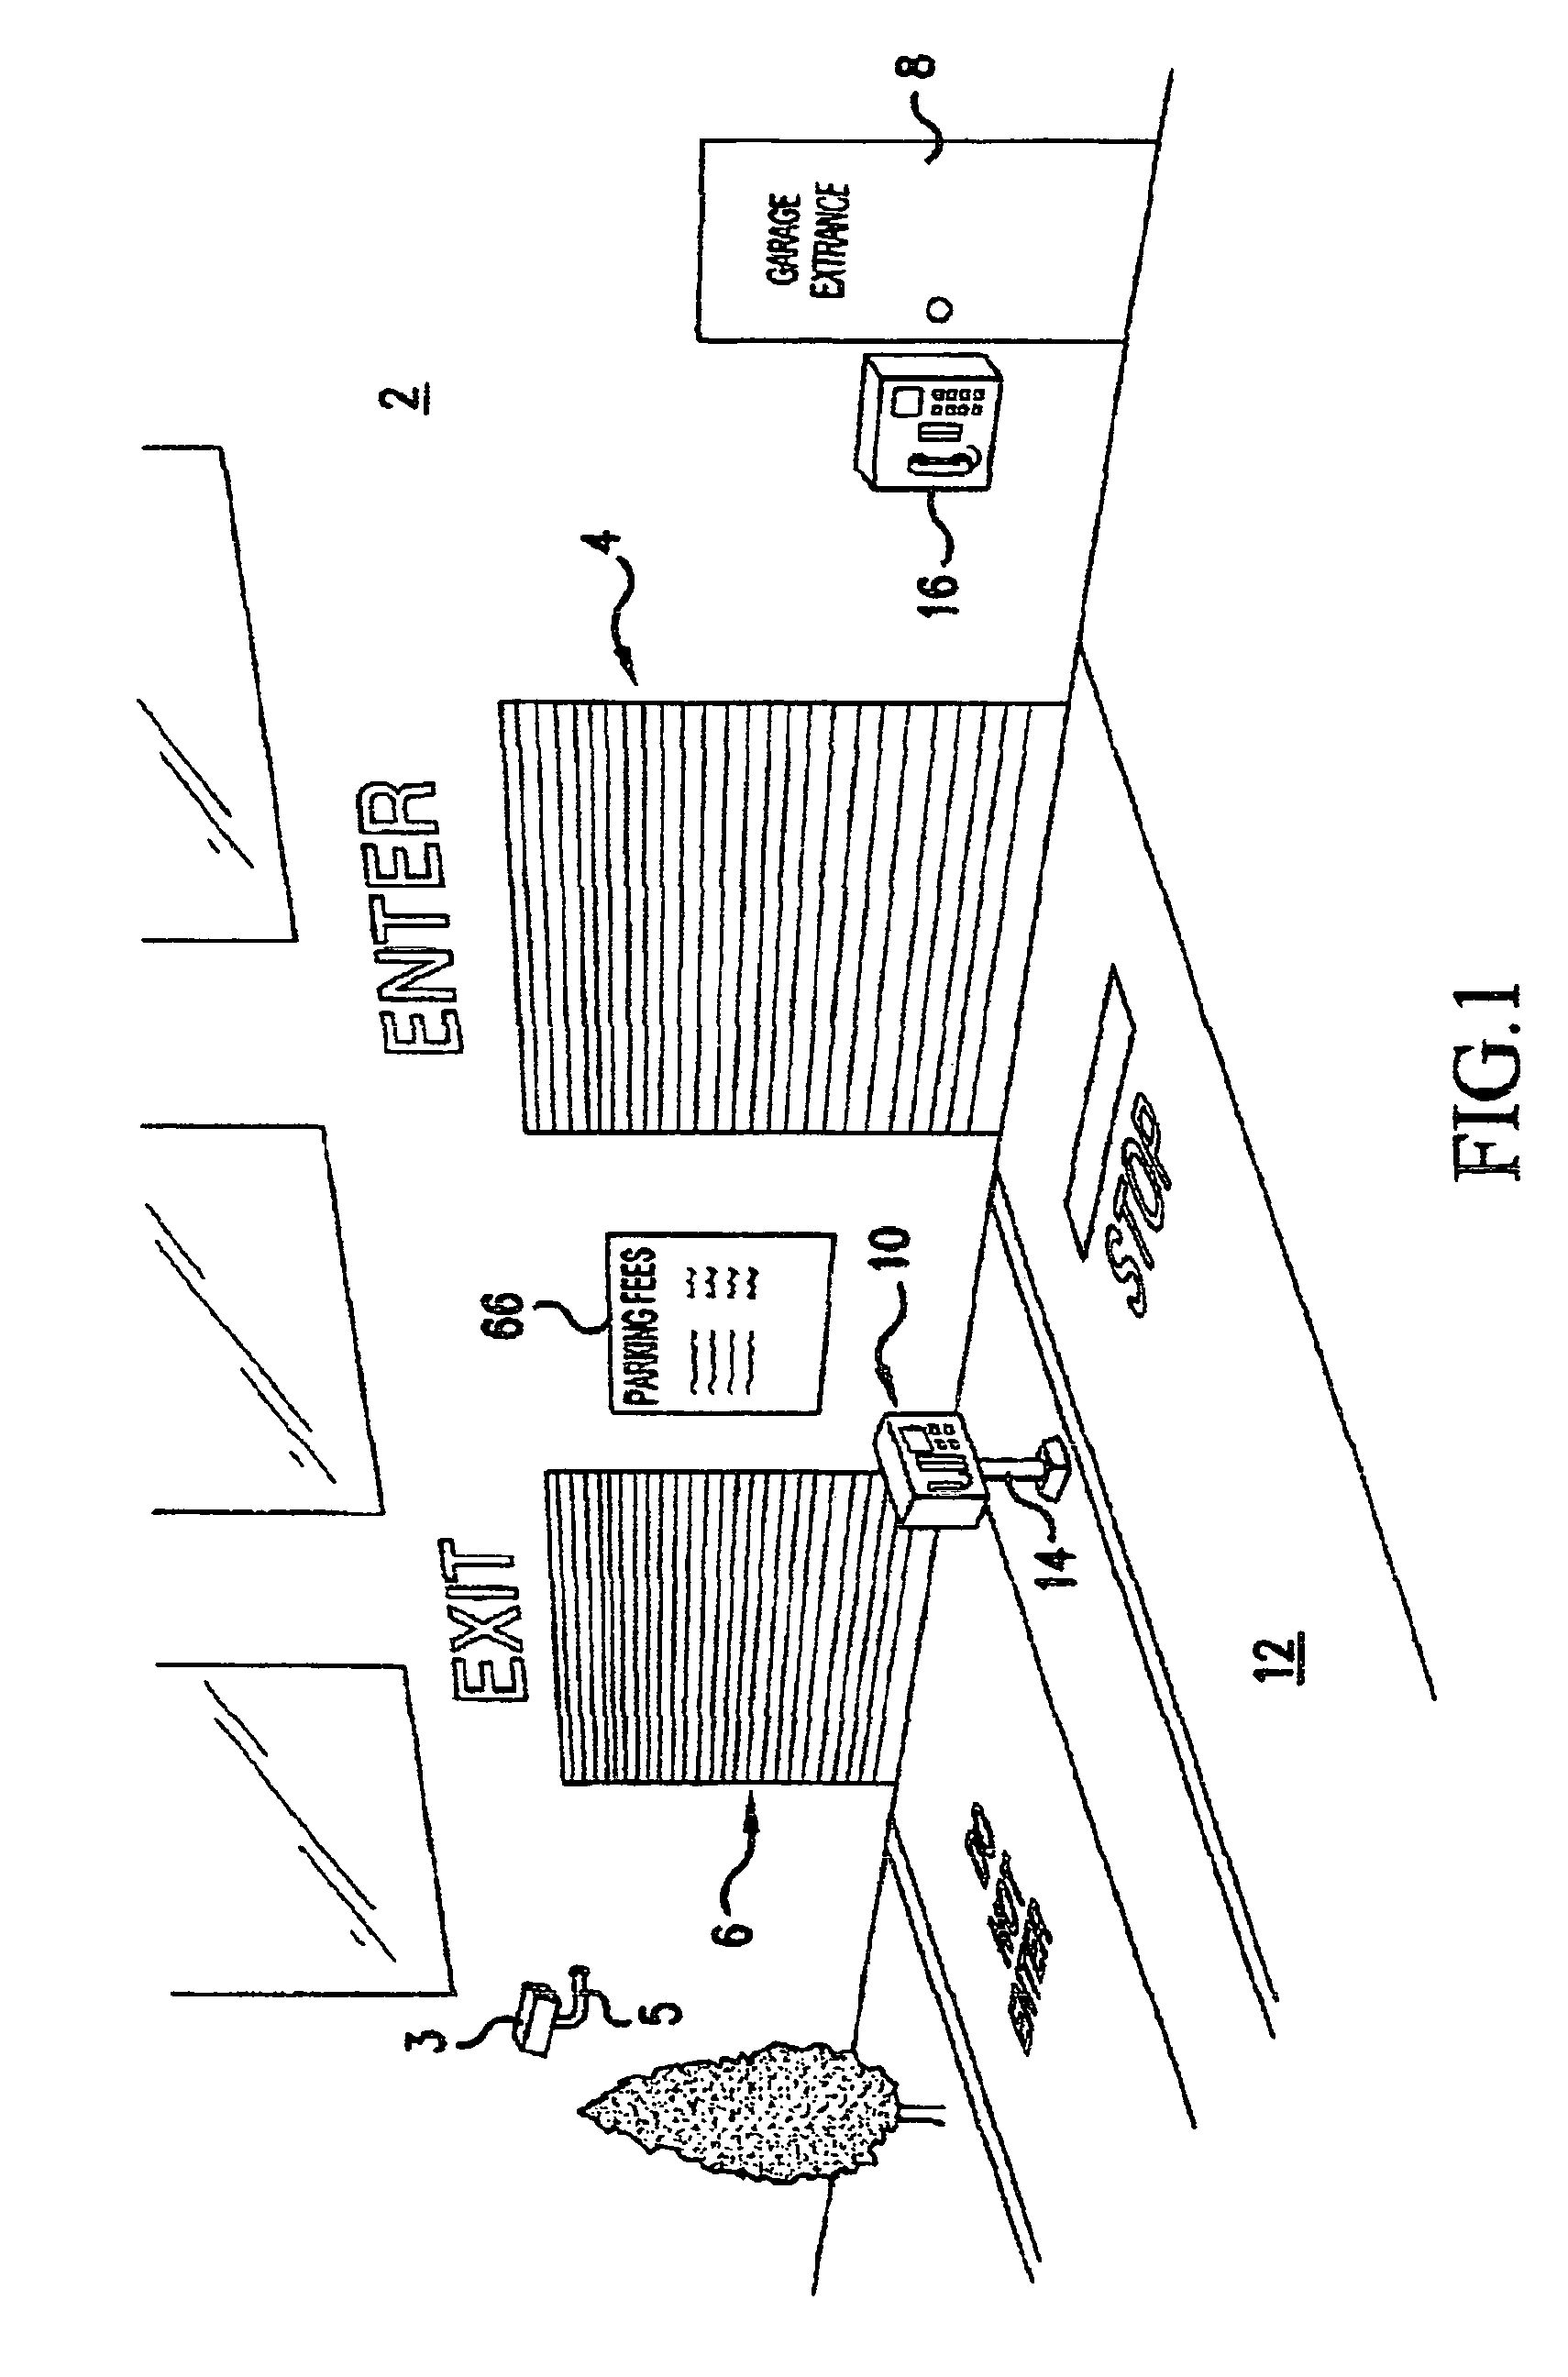 Management and control system for a designated functional space having at least one portal